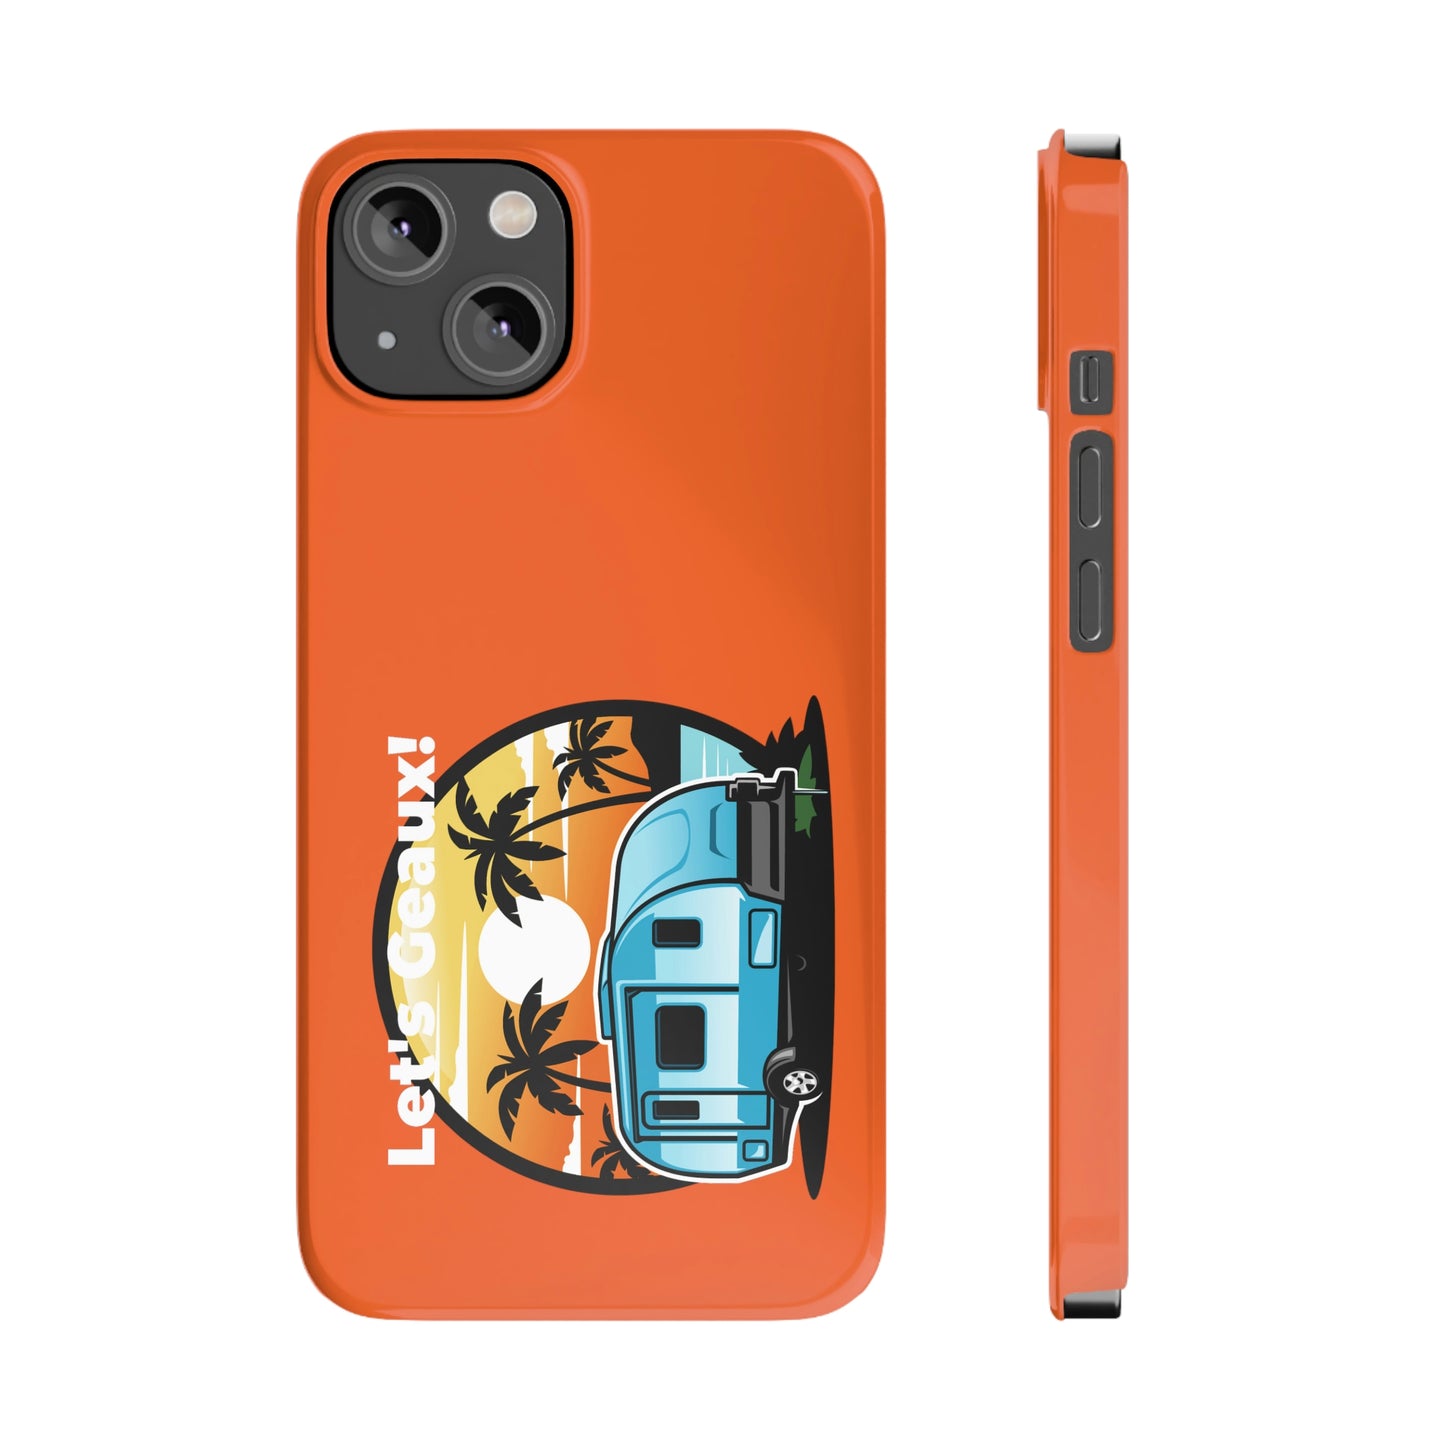 Protect Your Travel Memories with the Let's Geaux Phone Case - Orange